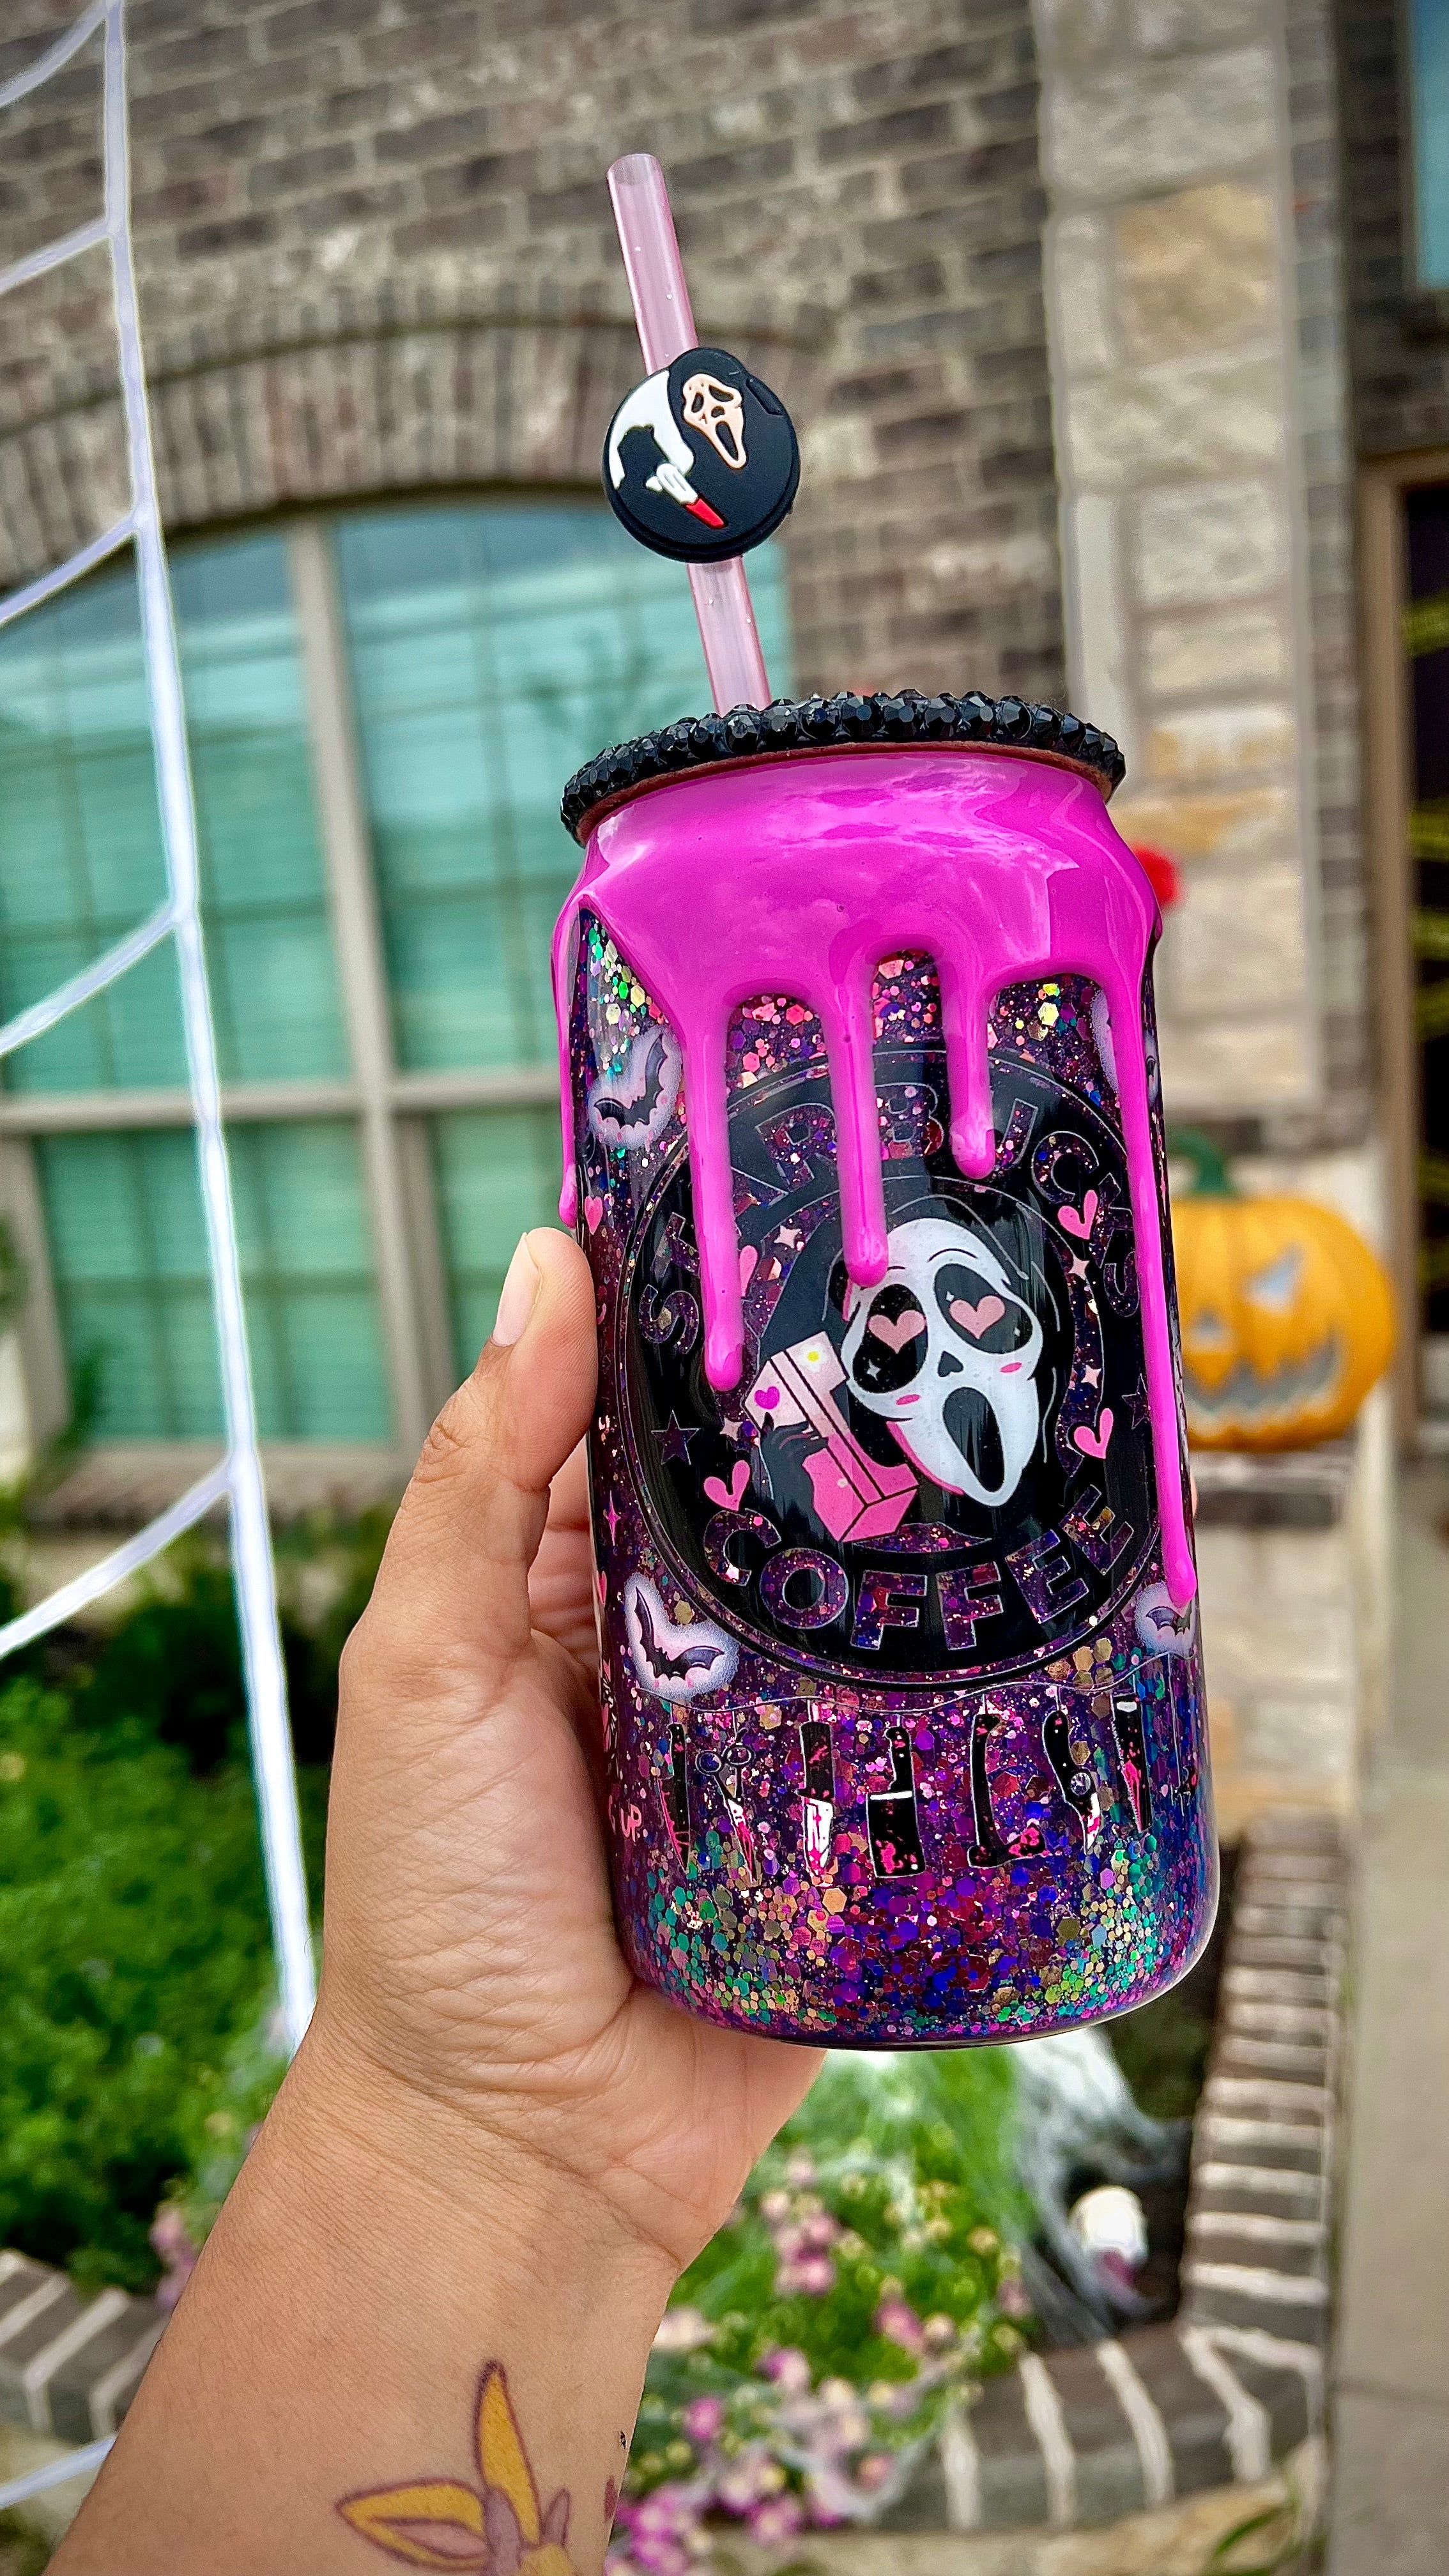 Nightmare before christmas glass can drinking glass bamboo lid and straw